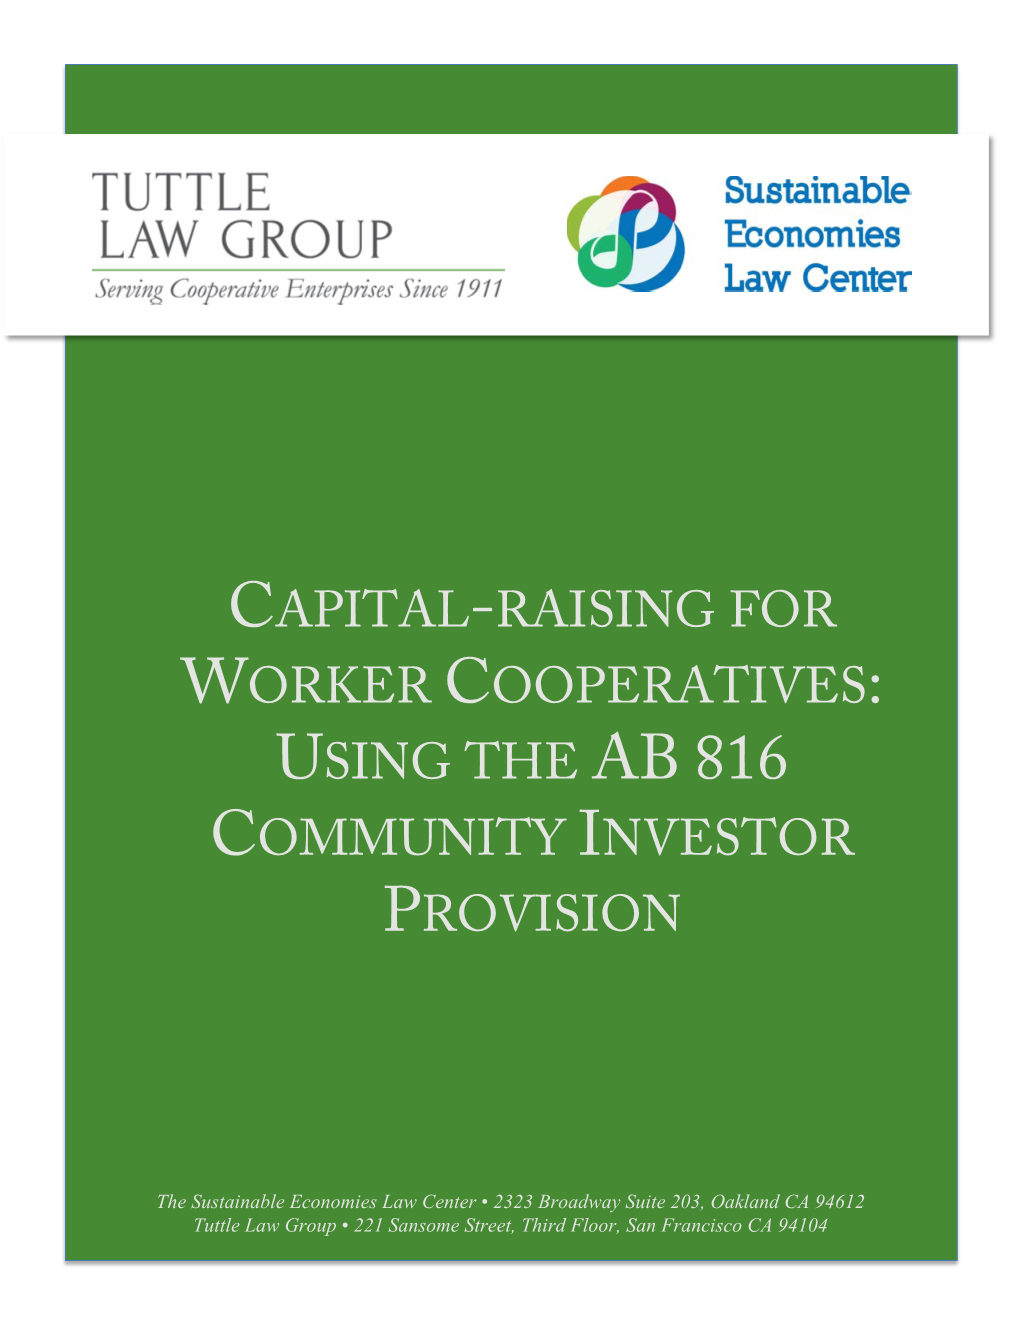 Capital-Raising for Worker Cooperatives: Using the Ab 816 Community Investor Provision